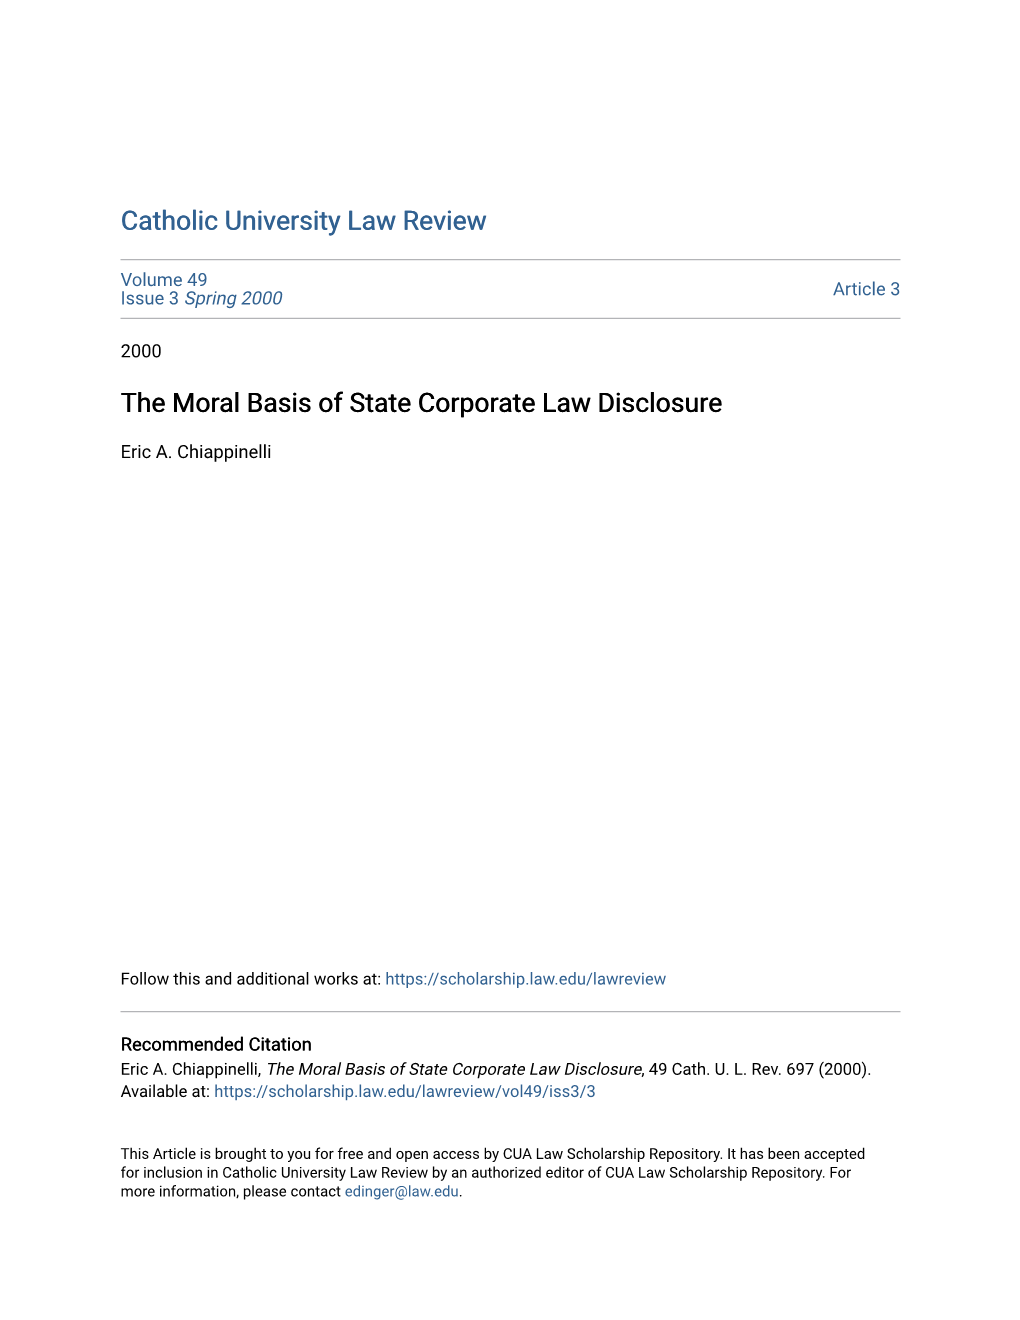 The Moral Basis of State Corporate Law Disclosure